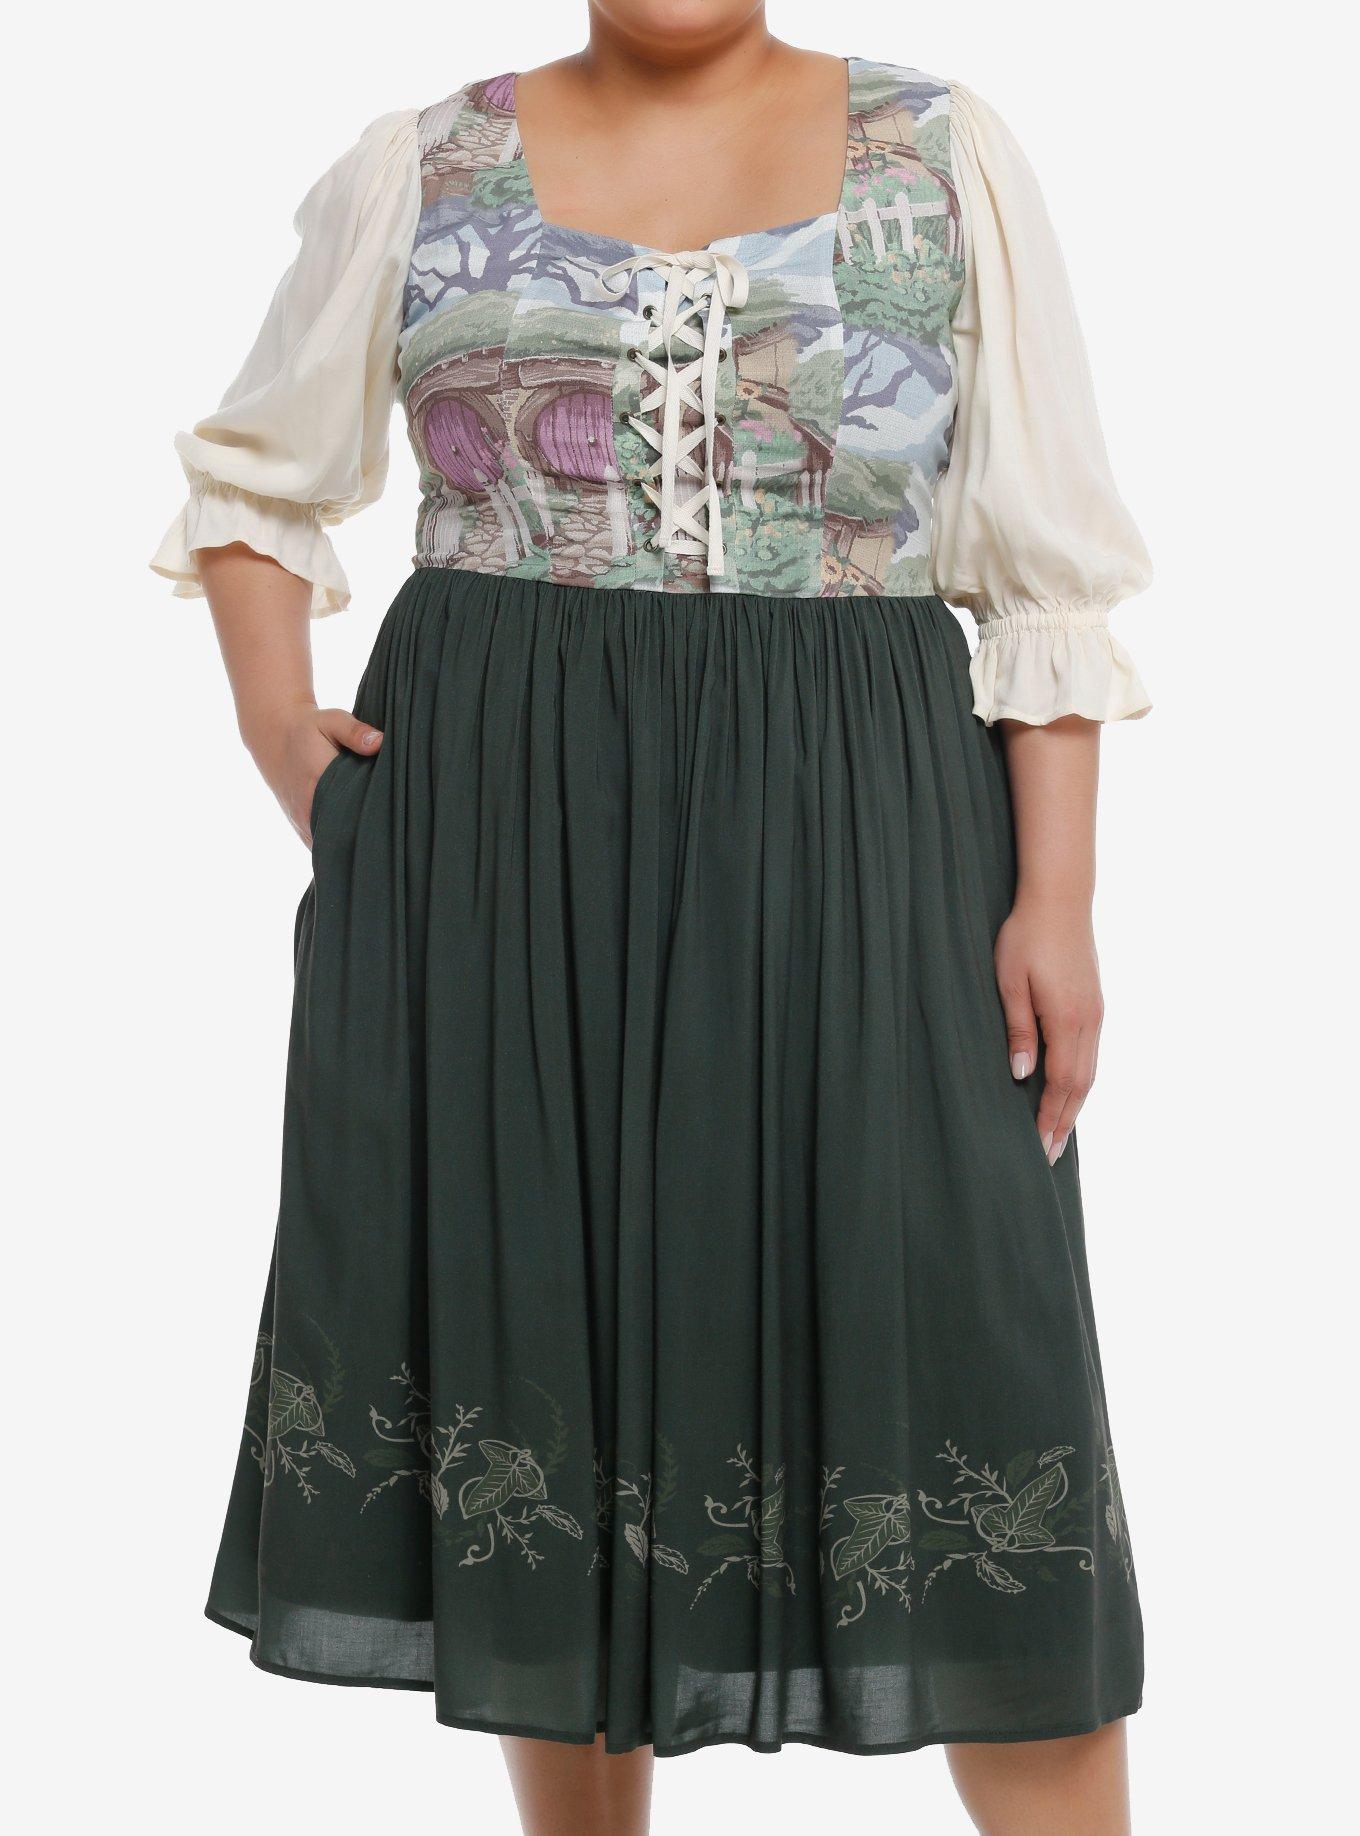 The Lord Of The Rings The Shire Hobbit Lace-Up Dress Plus Size, MULTI, hi-res